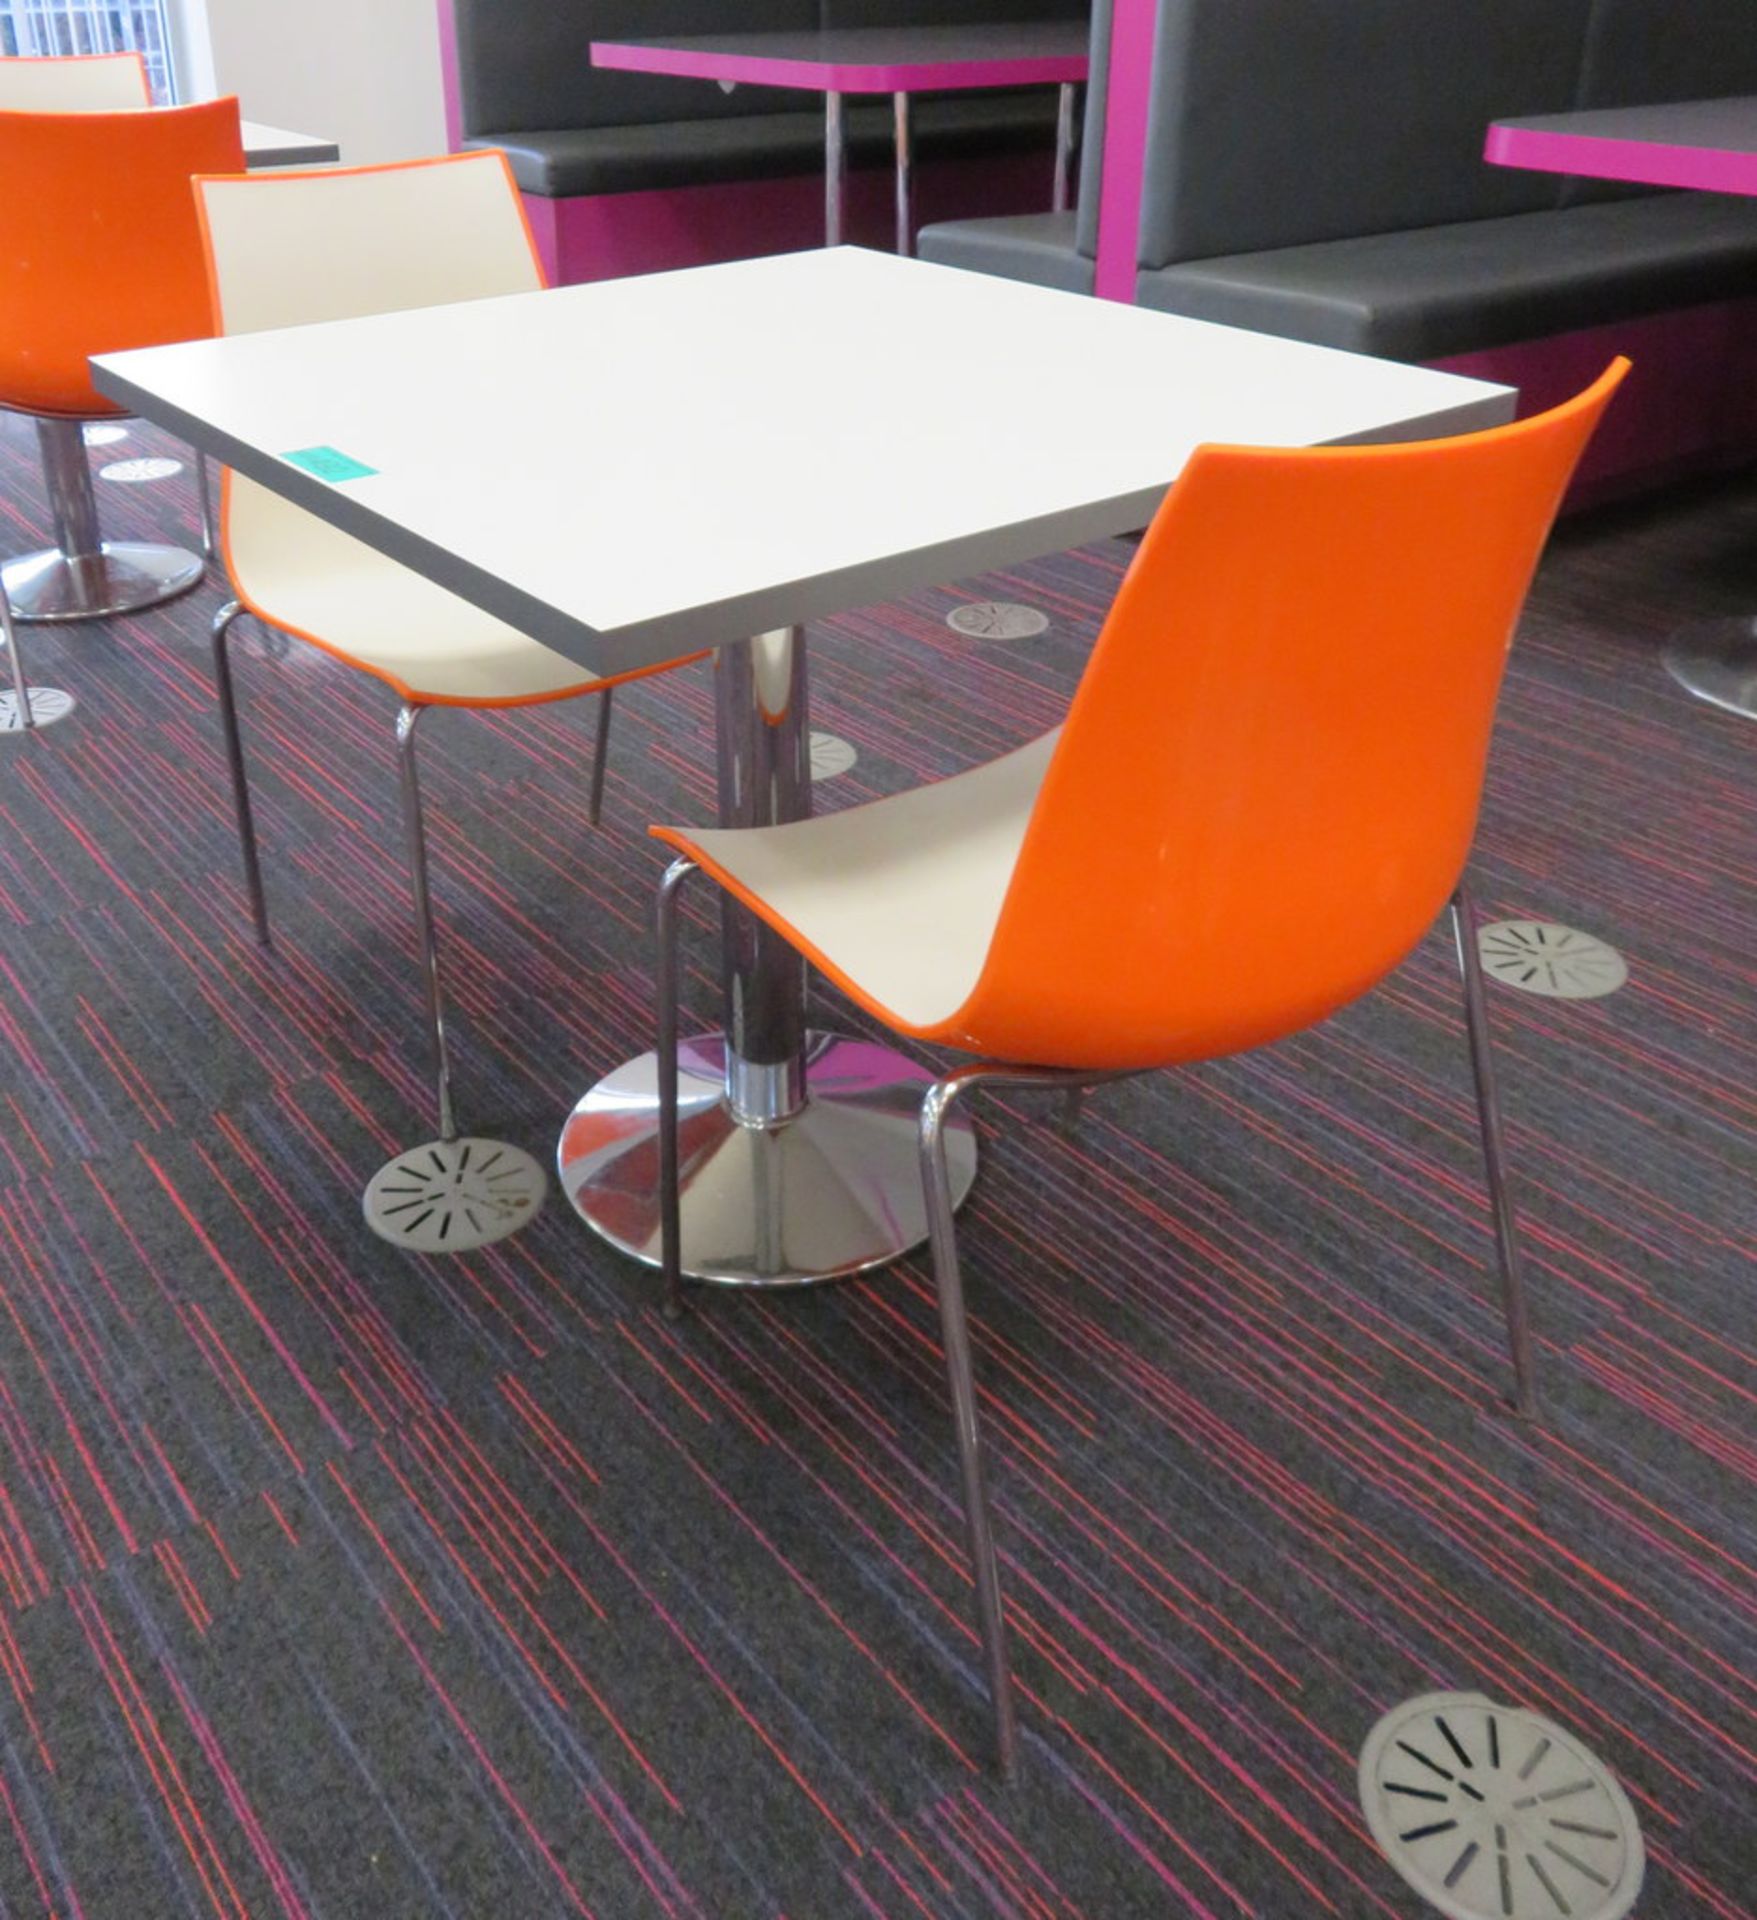 Canteen Table & 2 Chairs. Dimensions: 800x800x750mm (LxDxH)